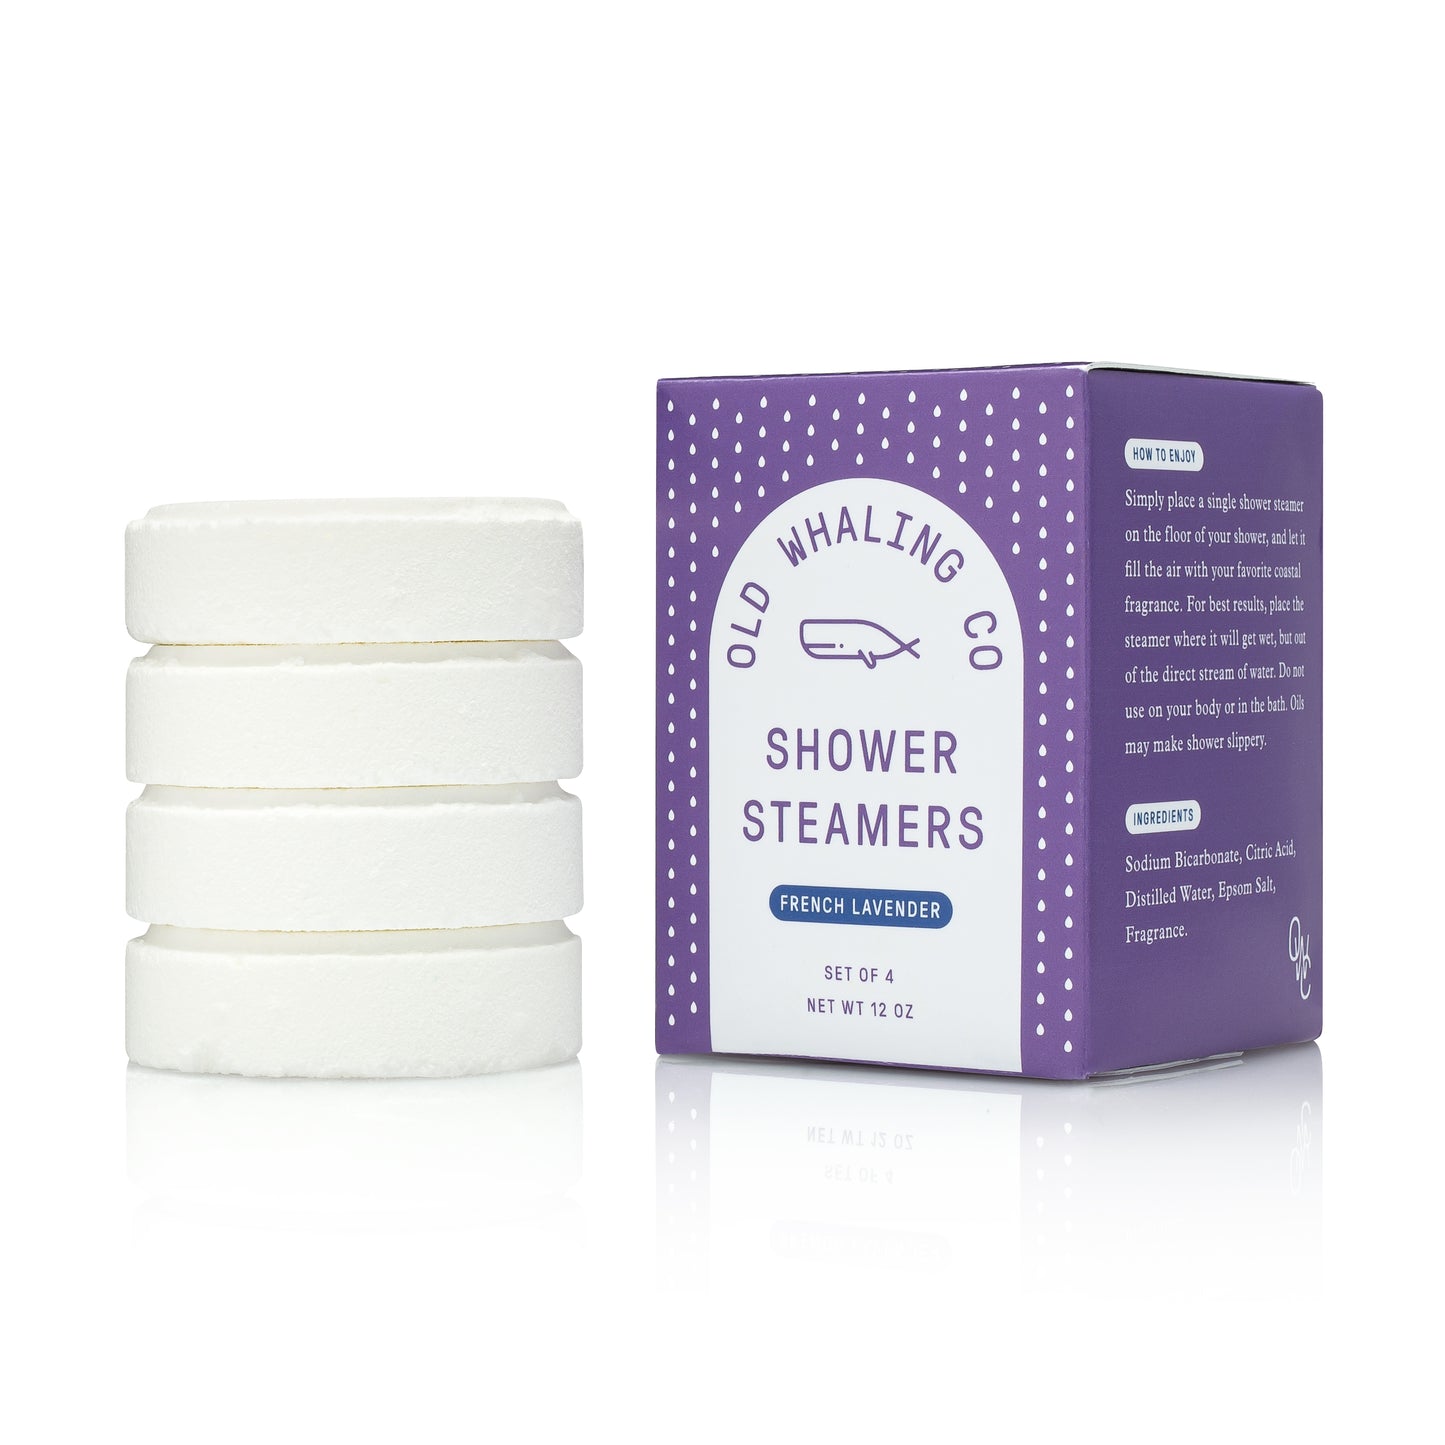 French Lavender Shower Steamers - PREORDER!